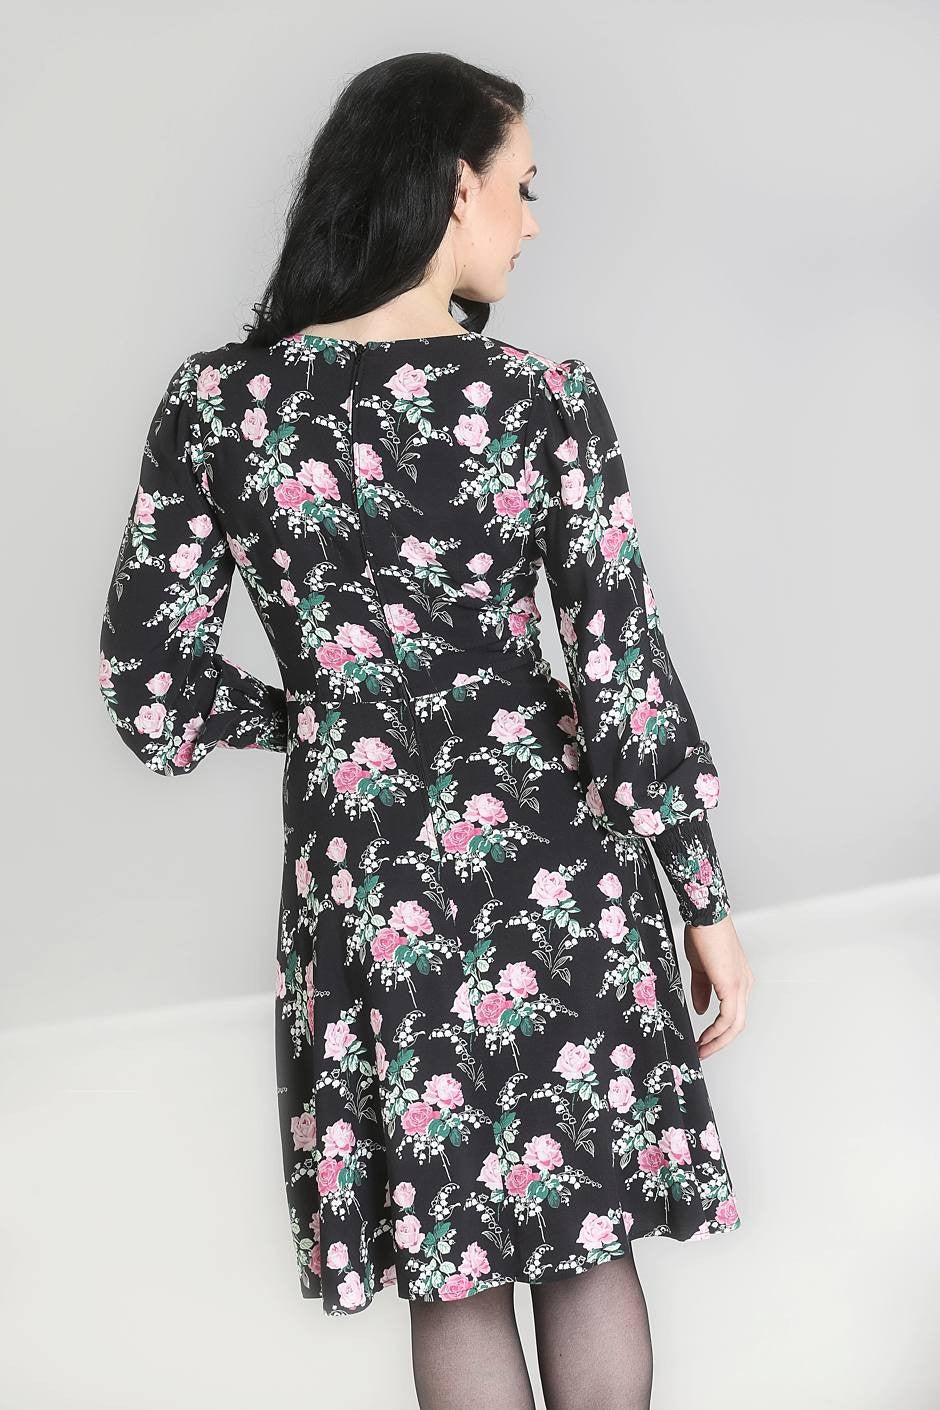 Felicia Floral Long Sleeved Dress - Hell Bunny (Last Available)